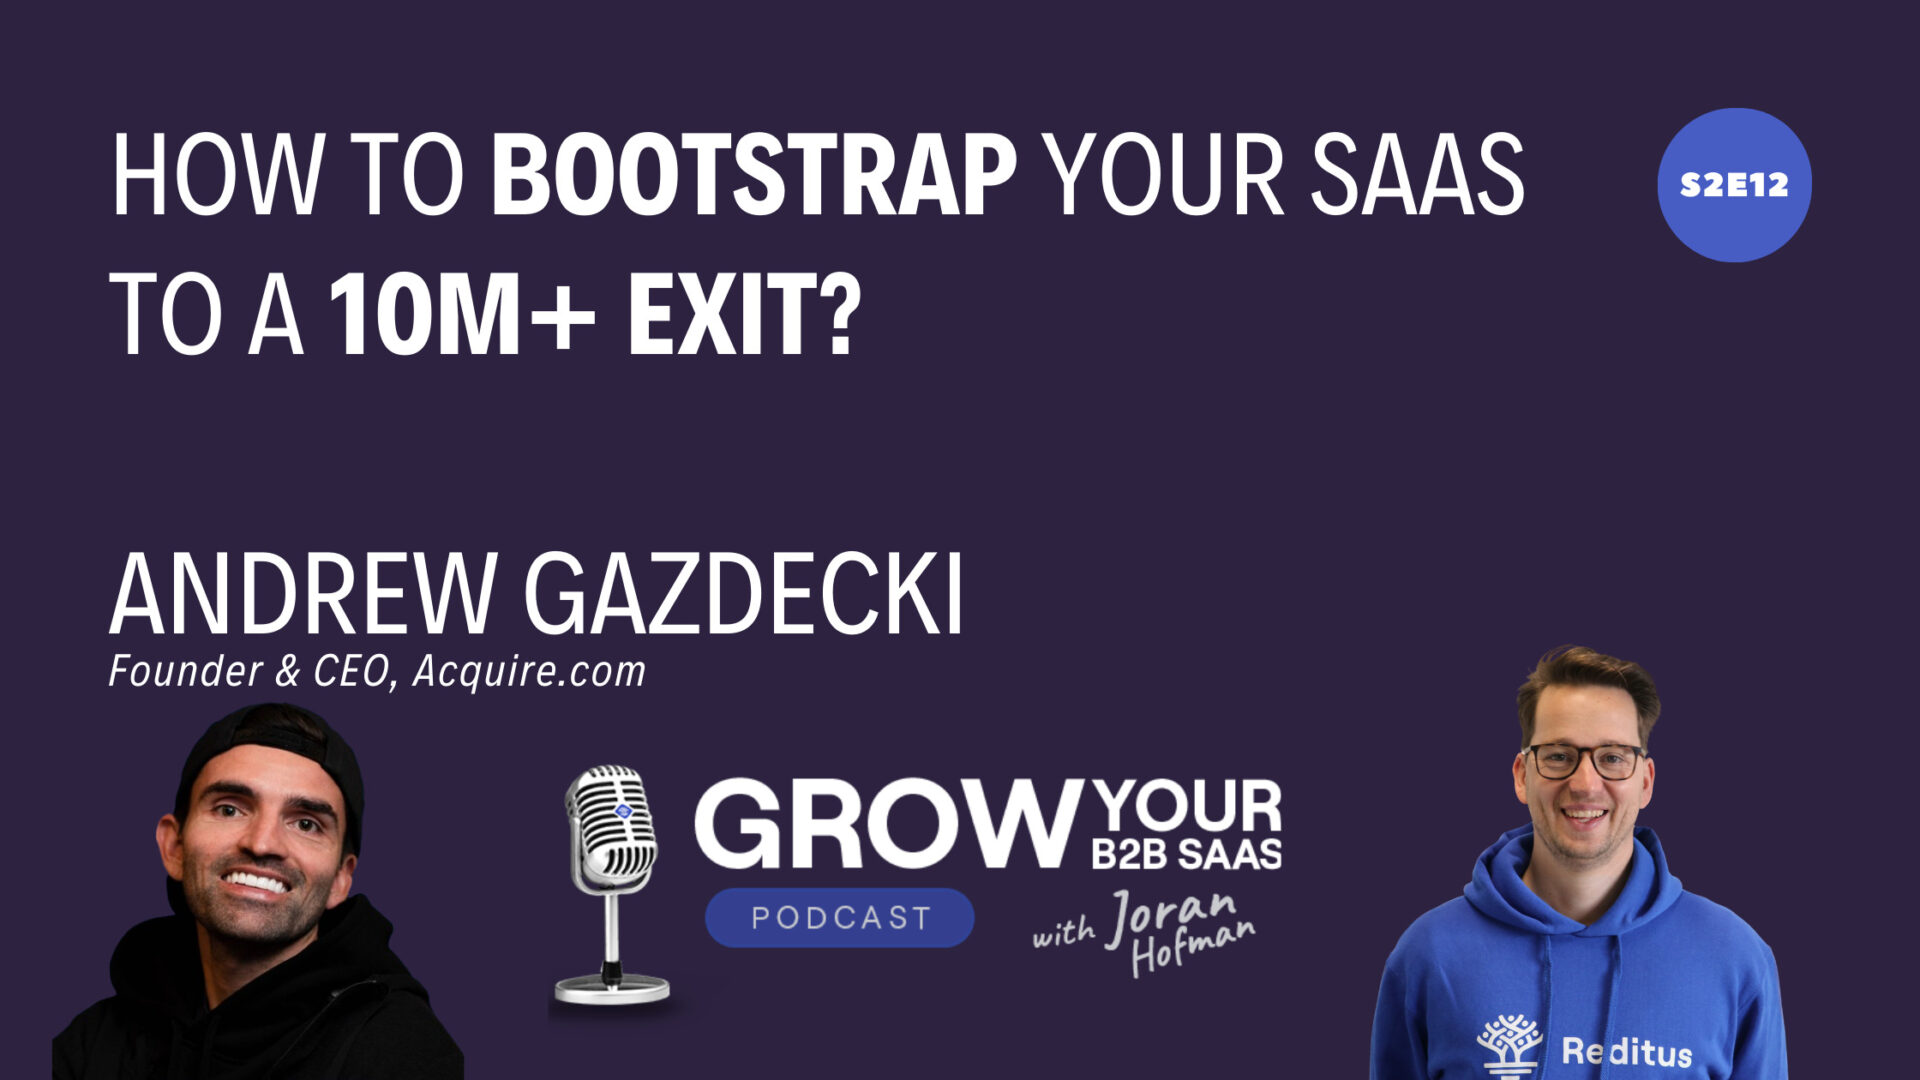 S2E12 – How to bootstrap your SaaS to a 10M+ exit? With Andrew Gazdecki